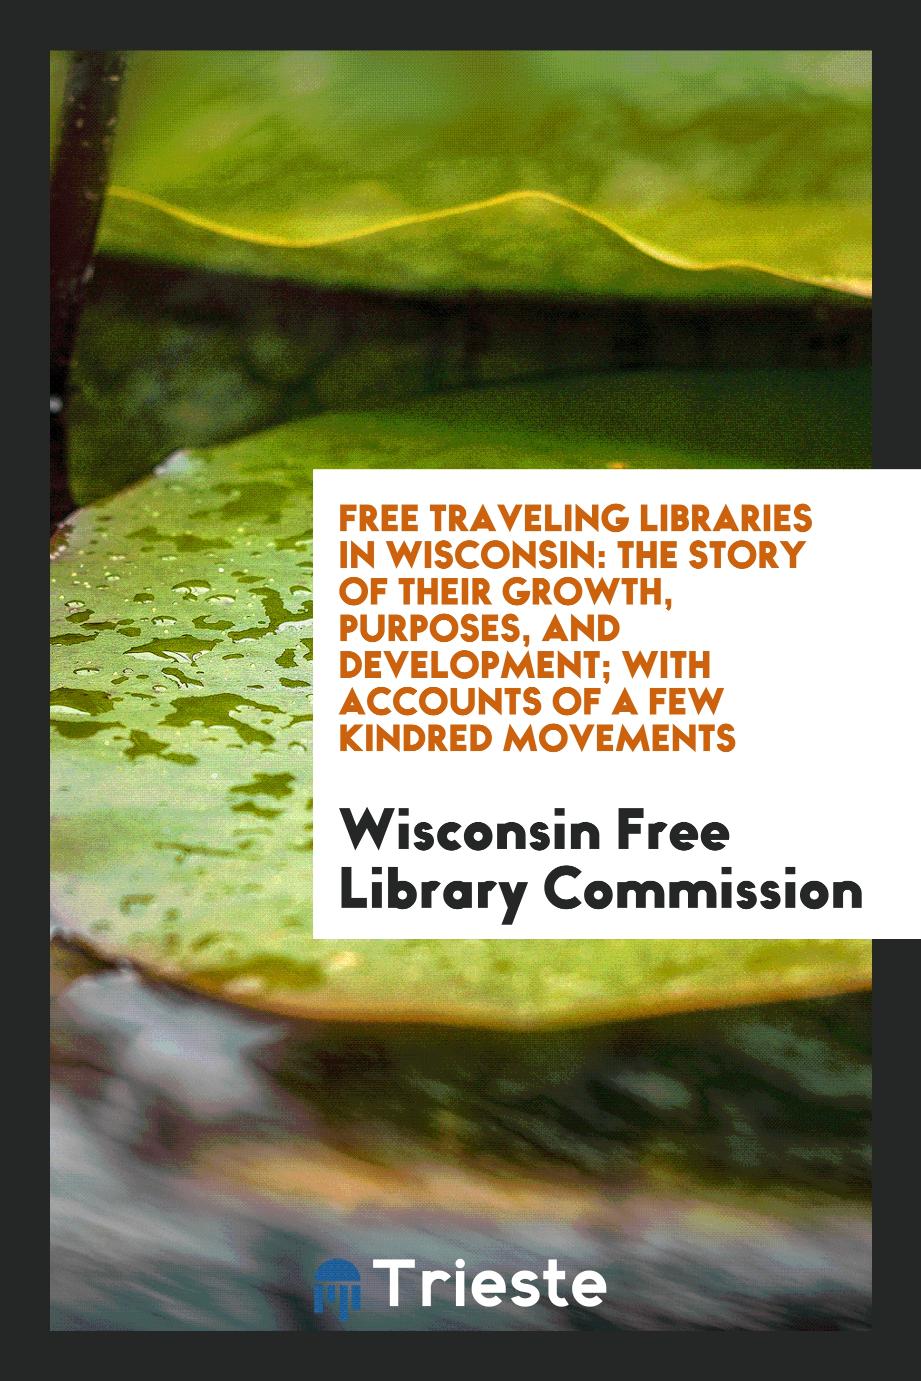 Free Traveling Libraries in Wisconsin: The Story of Their Growth, Purposes, and Development; with accounts of a few kindred movements